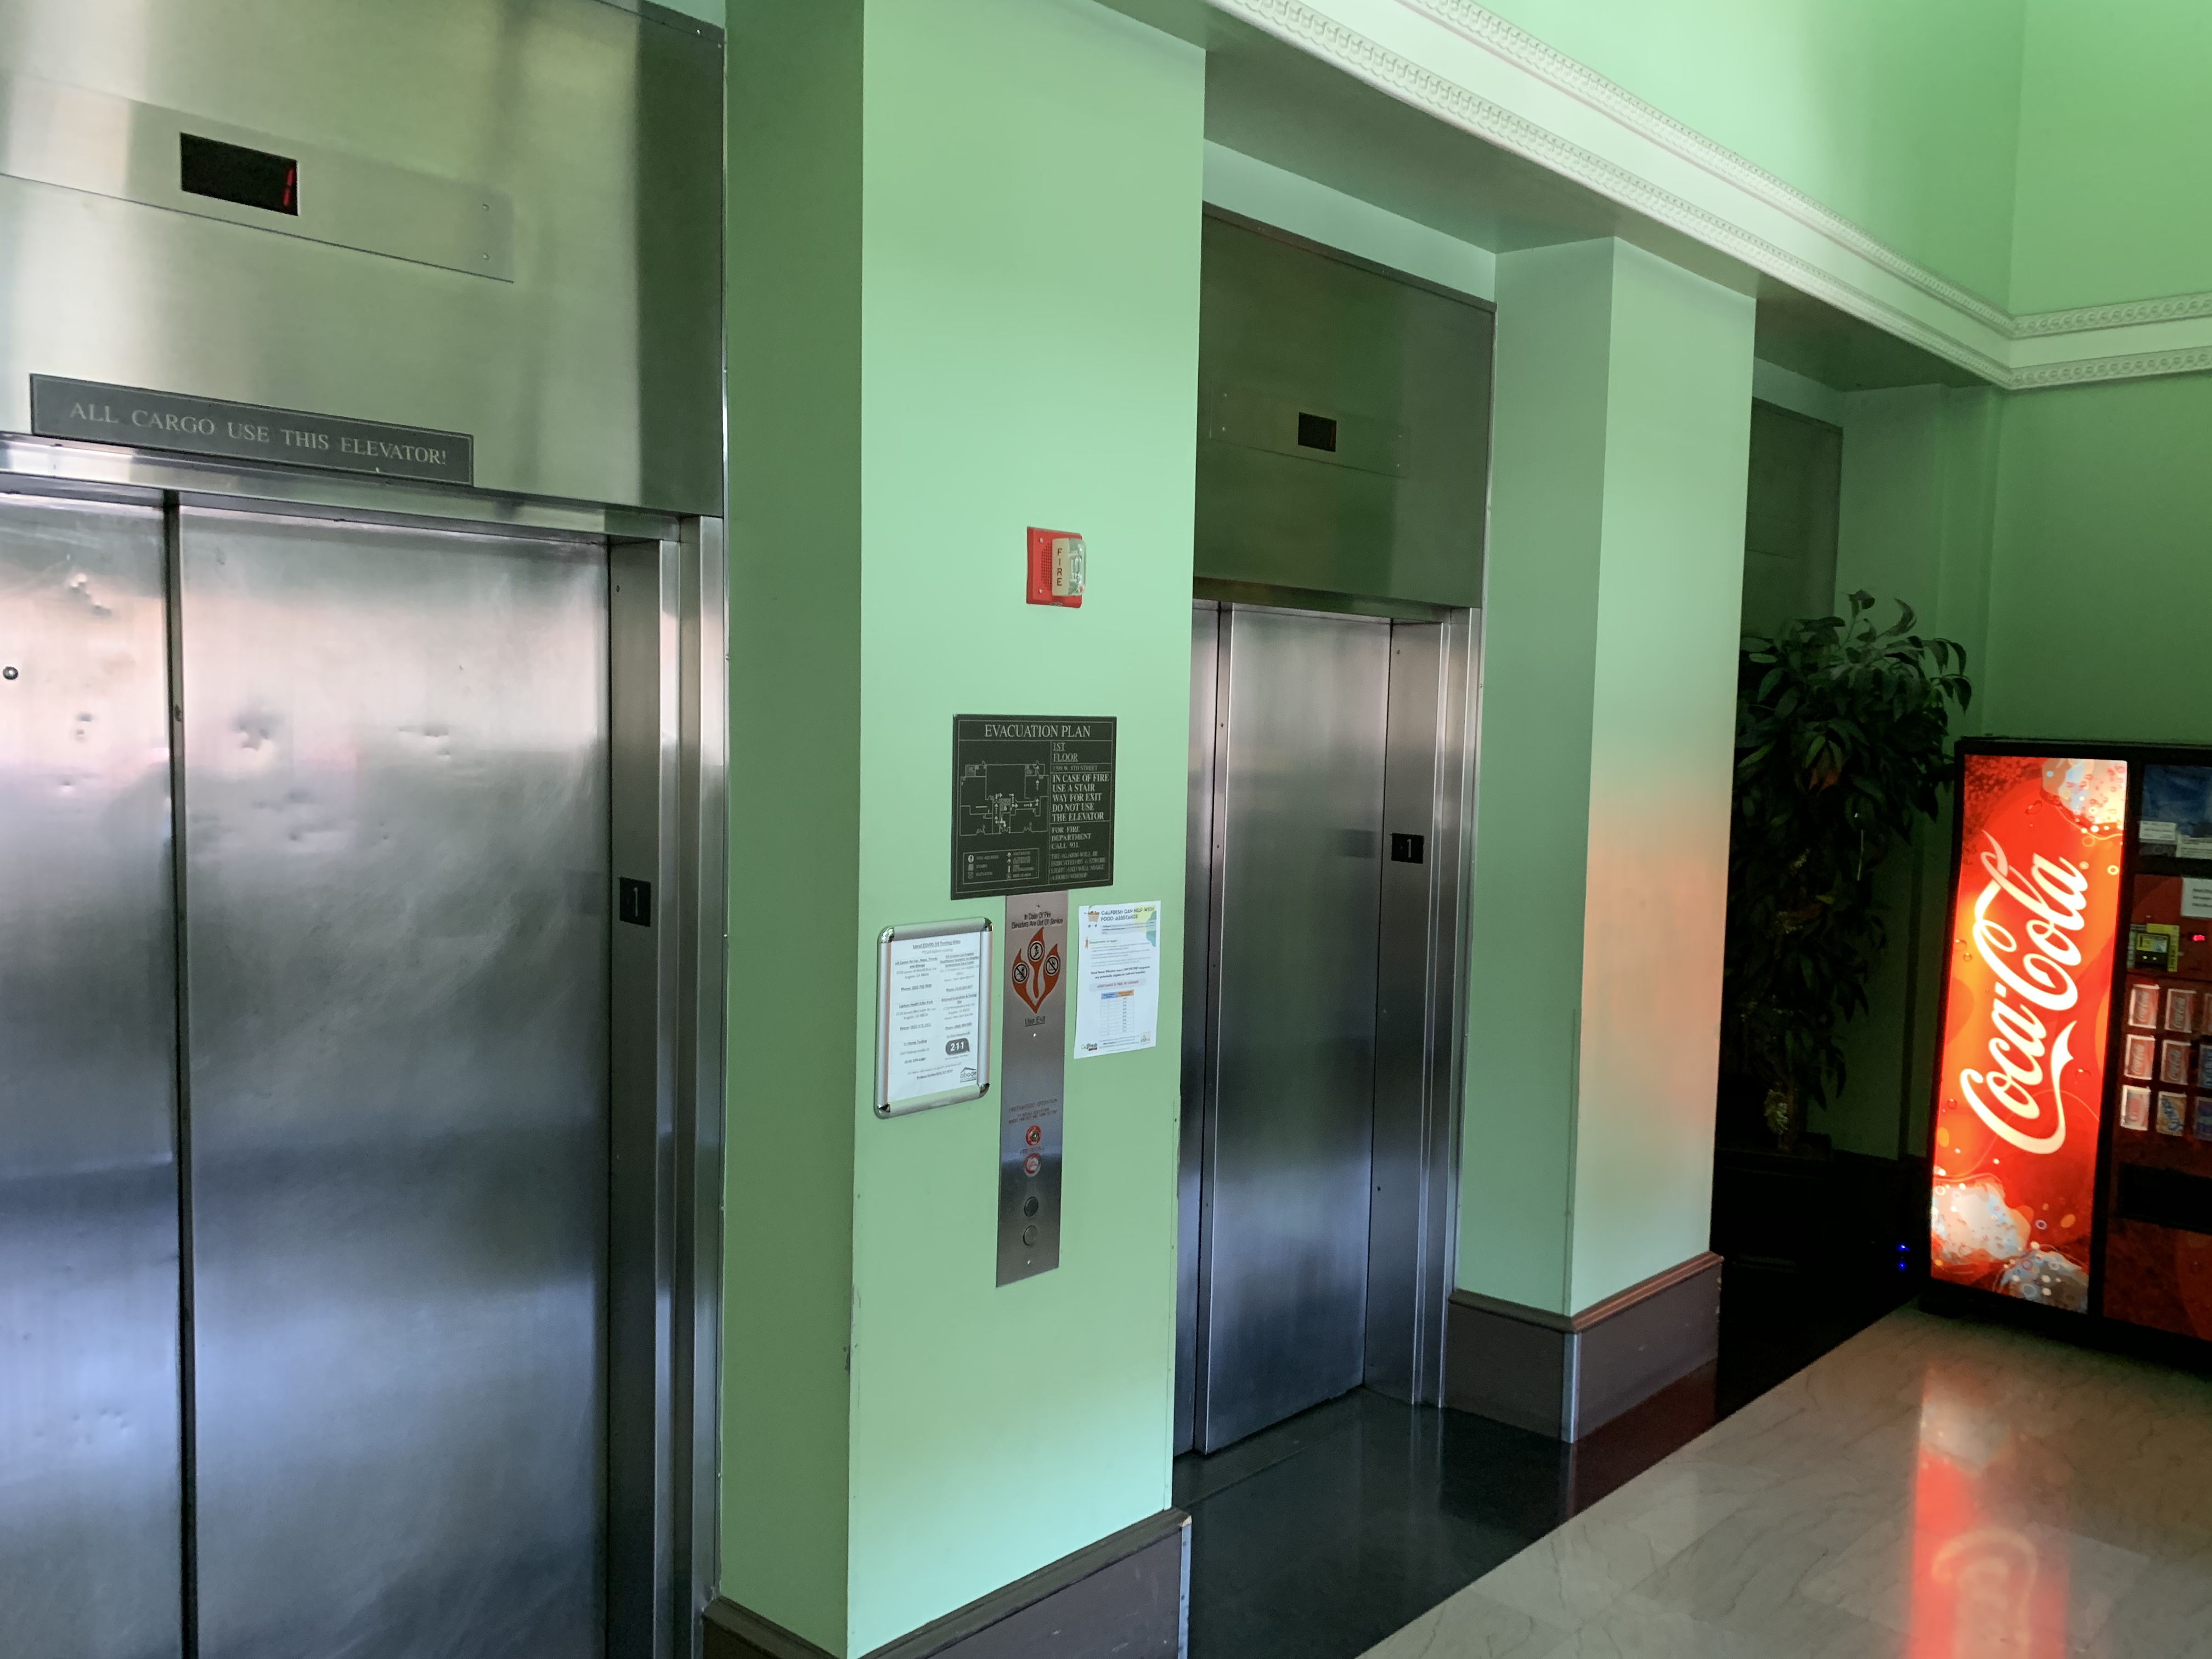 Image of the building lobby with entrances to the elevators